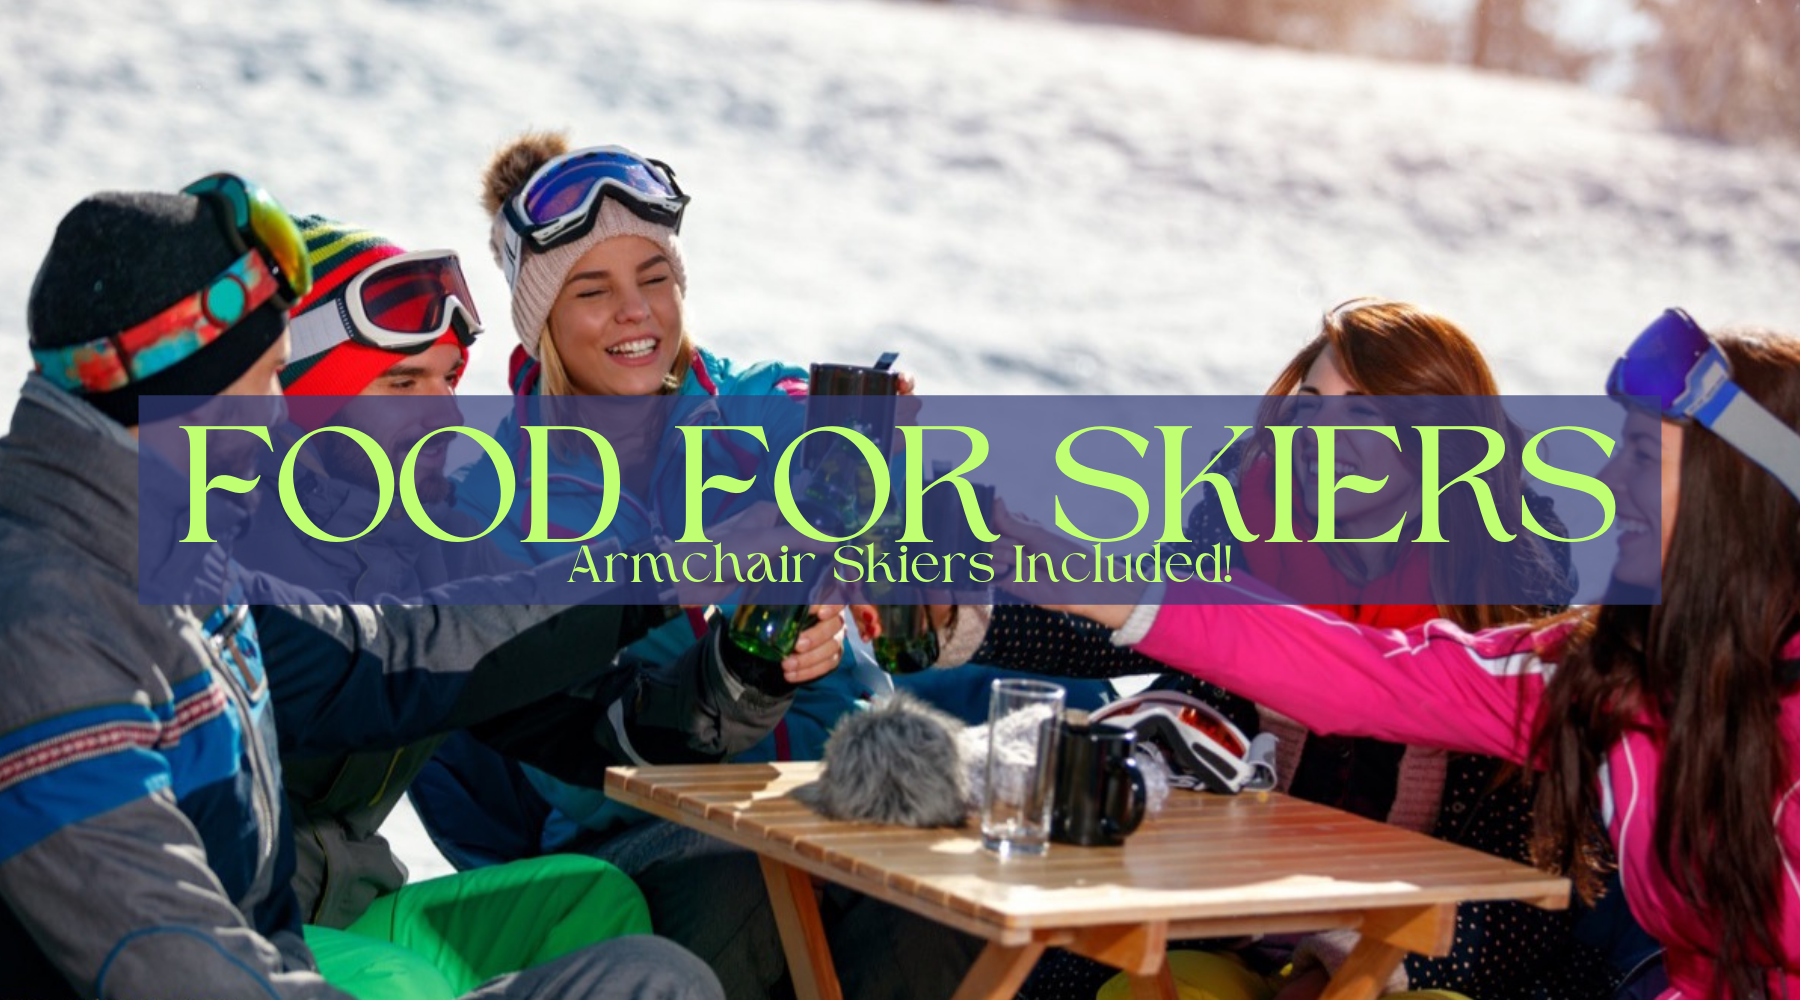 Food for Skiers (Armchair Skiers Included!)